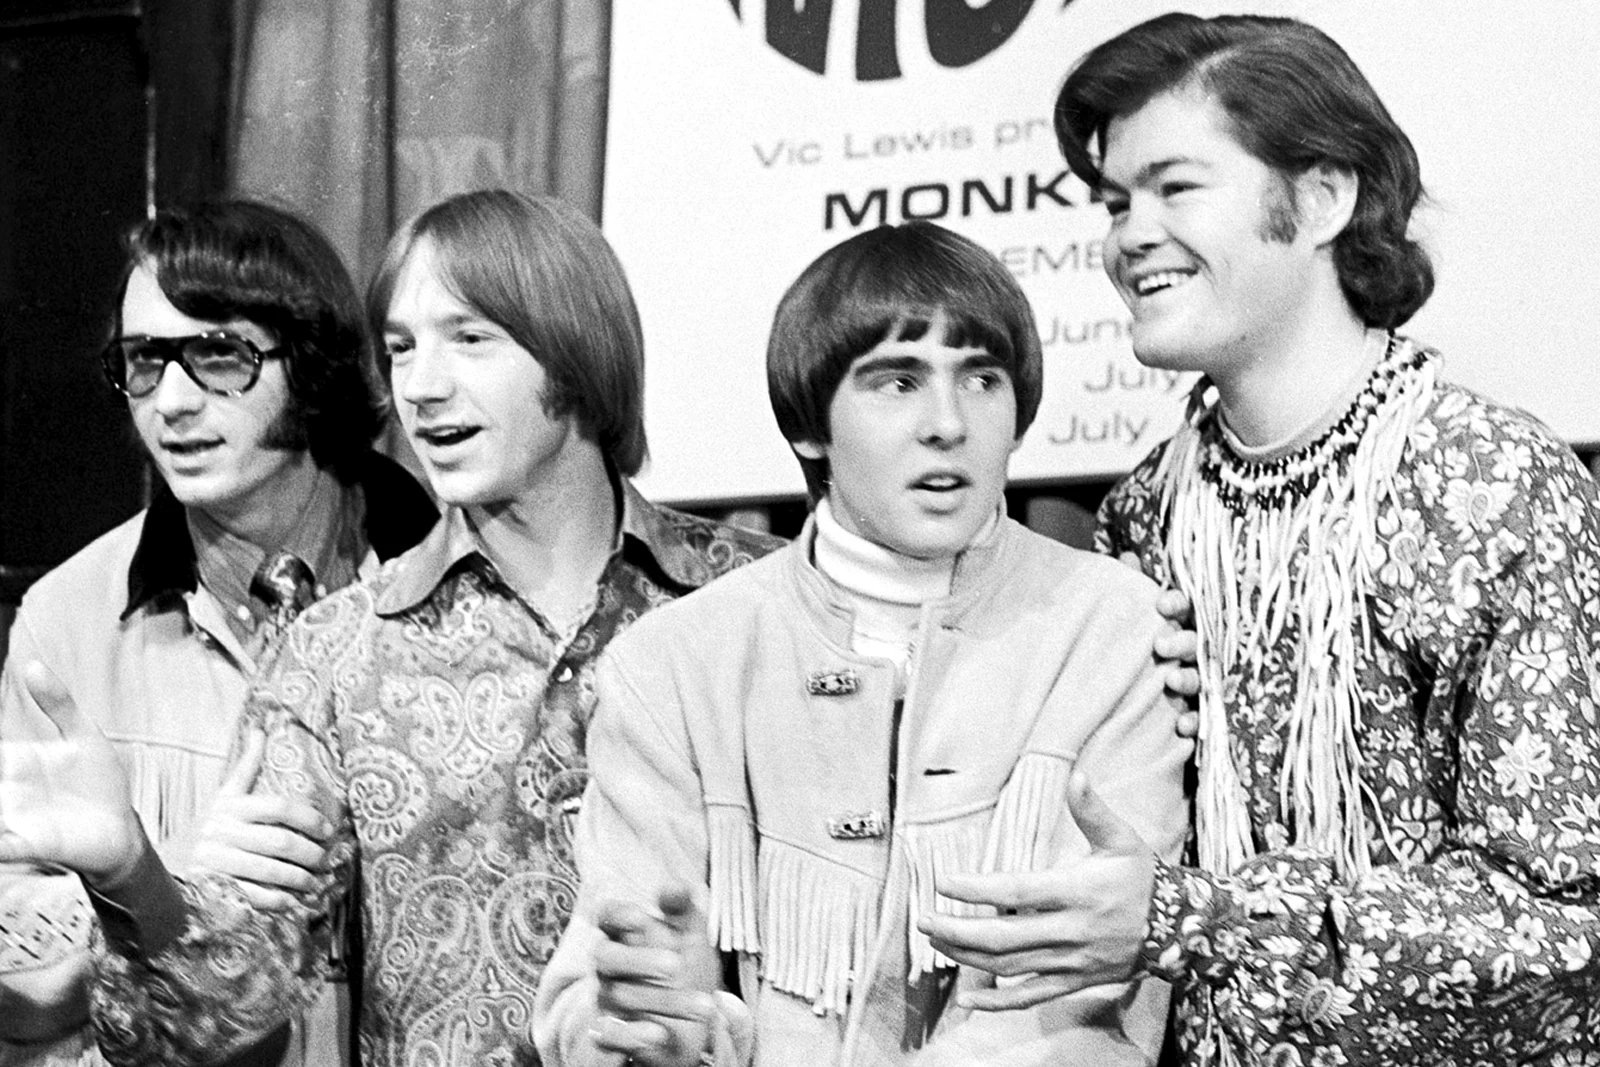 The Monkees - Wikipedia